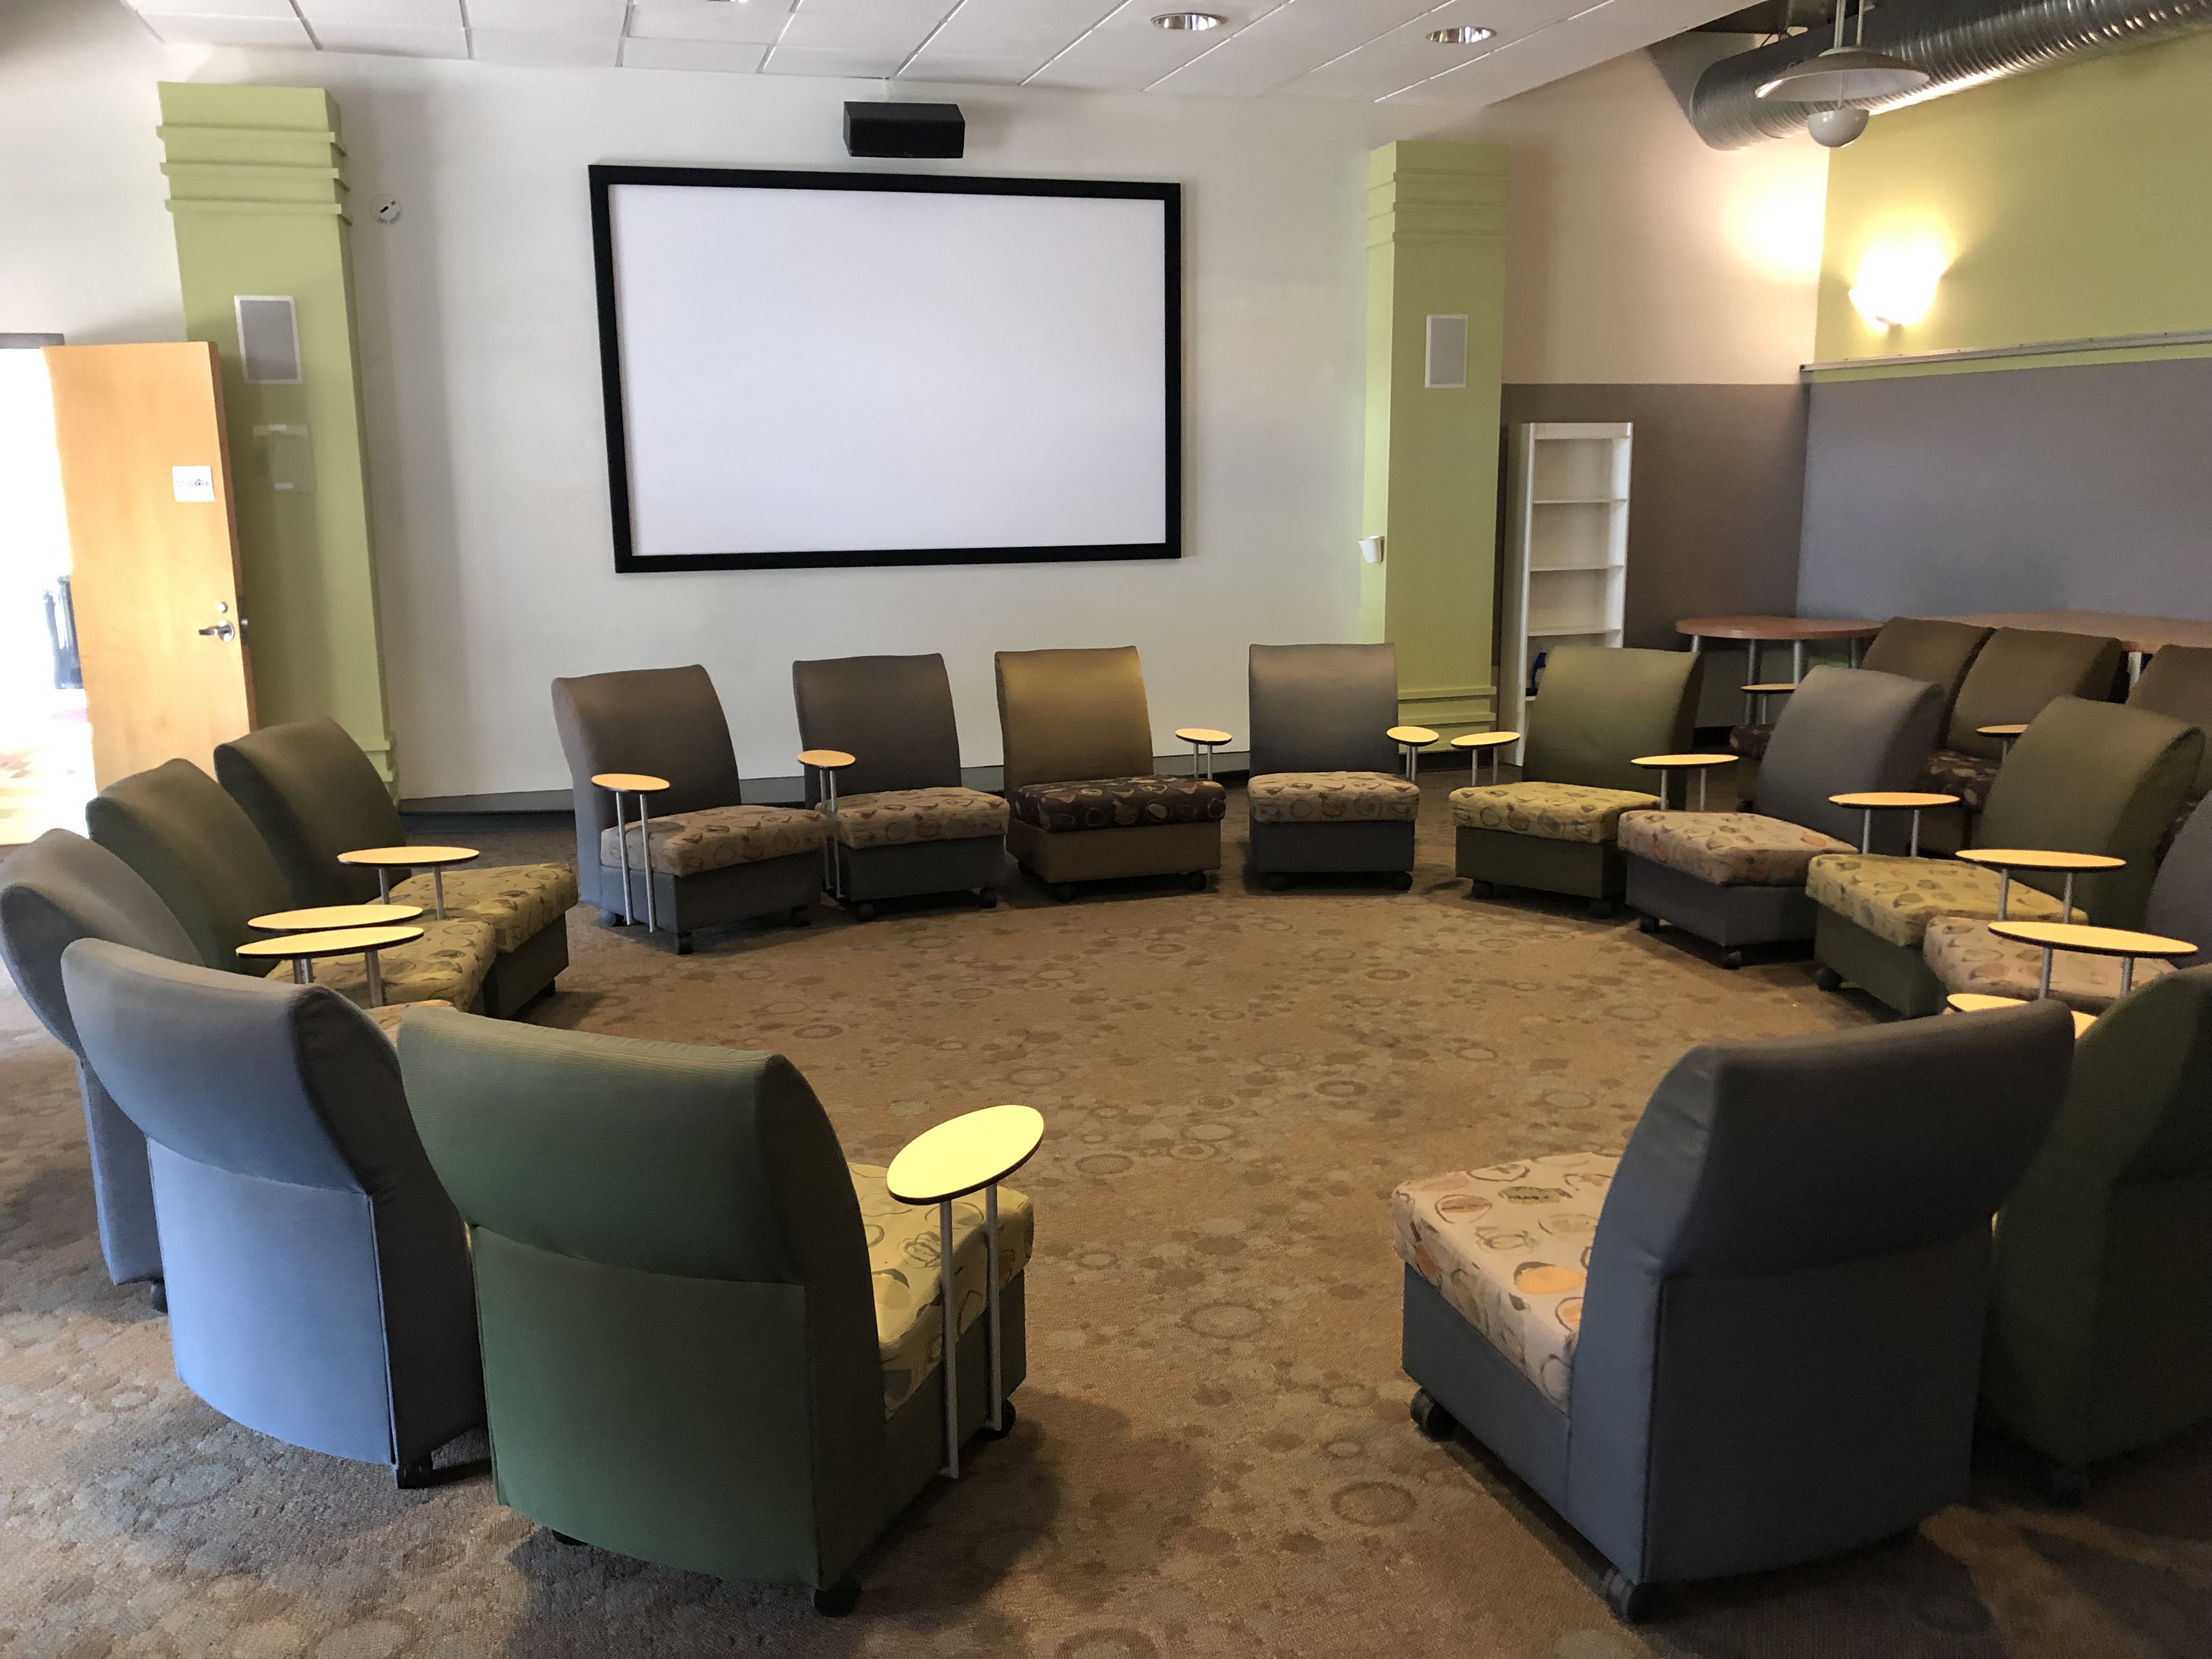 The Theatre Room: Studio B upholstered chairs with tablet desks in a circle, with projection screen